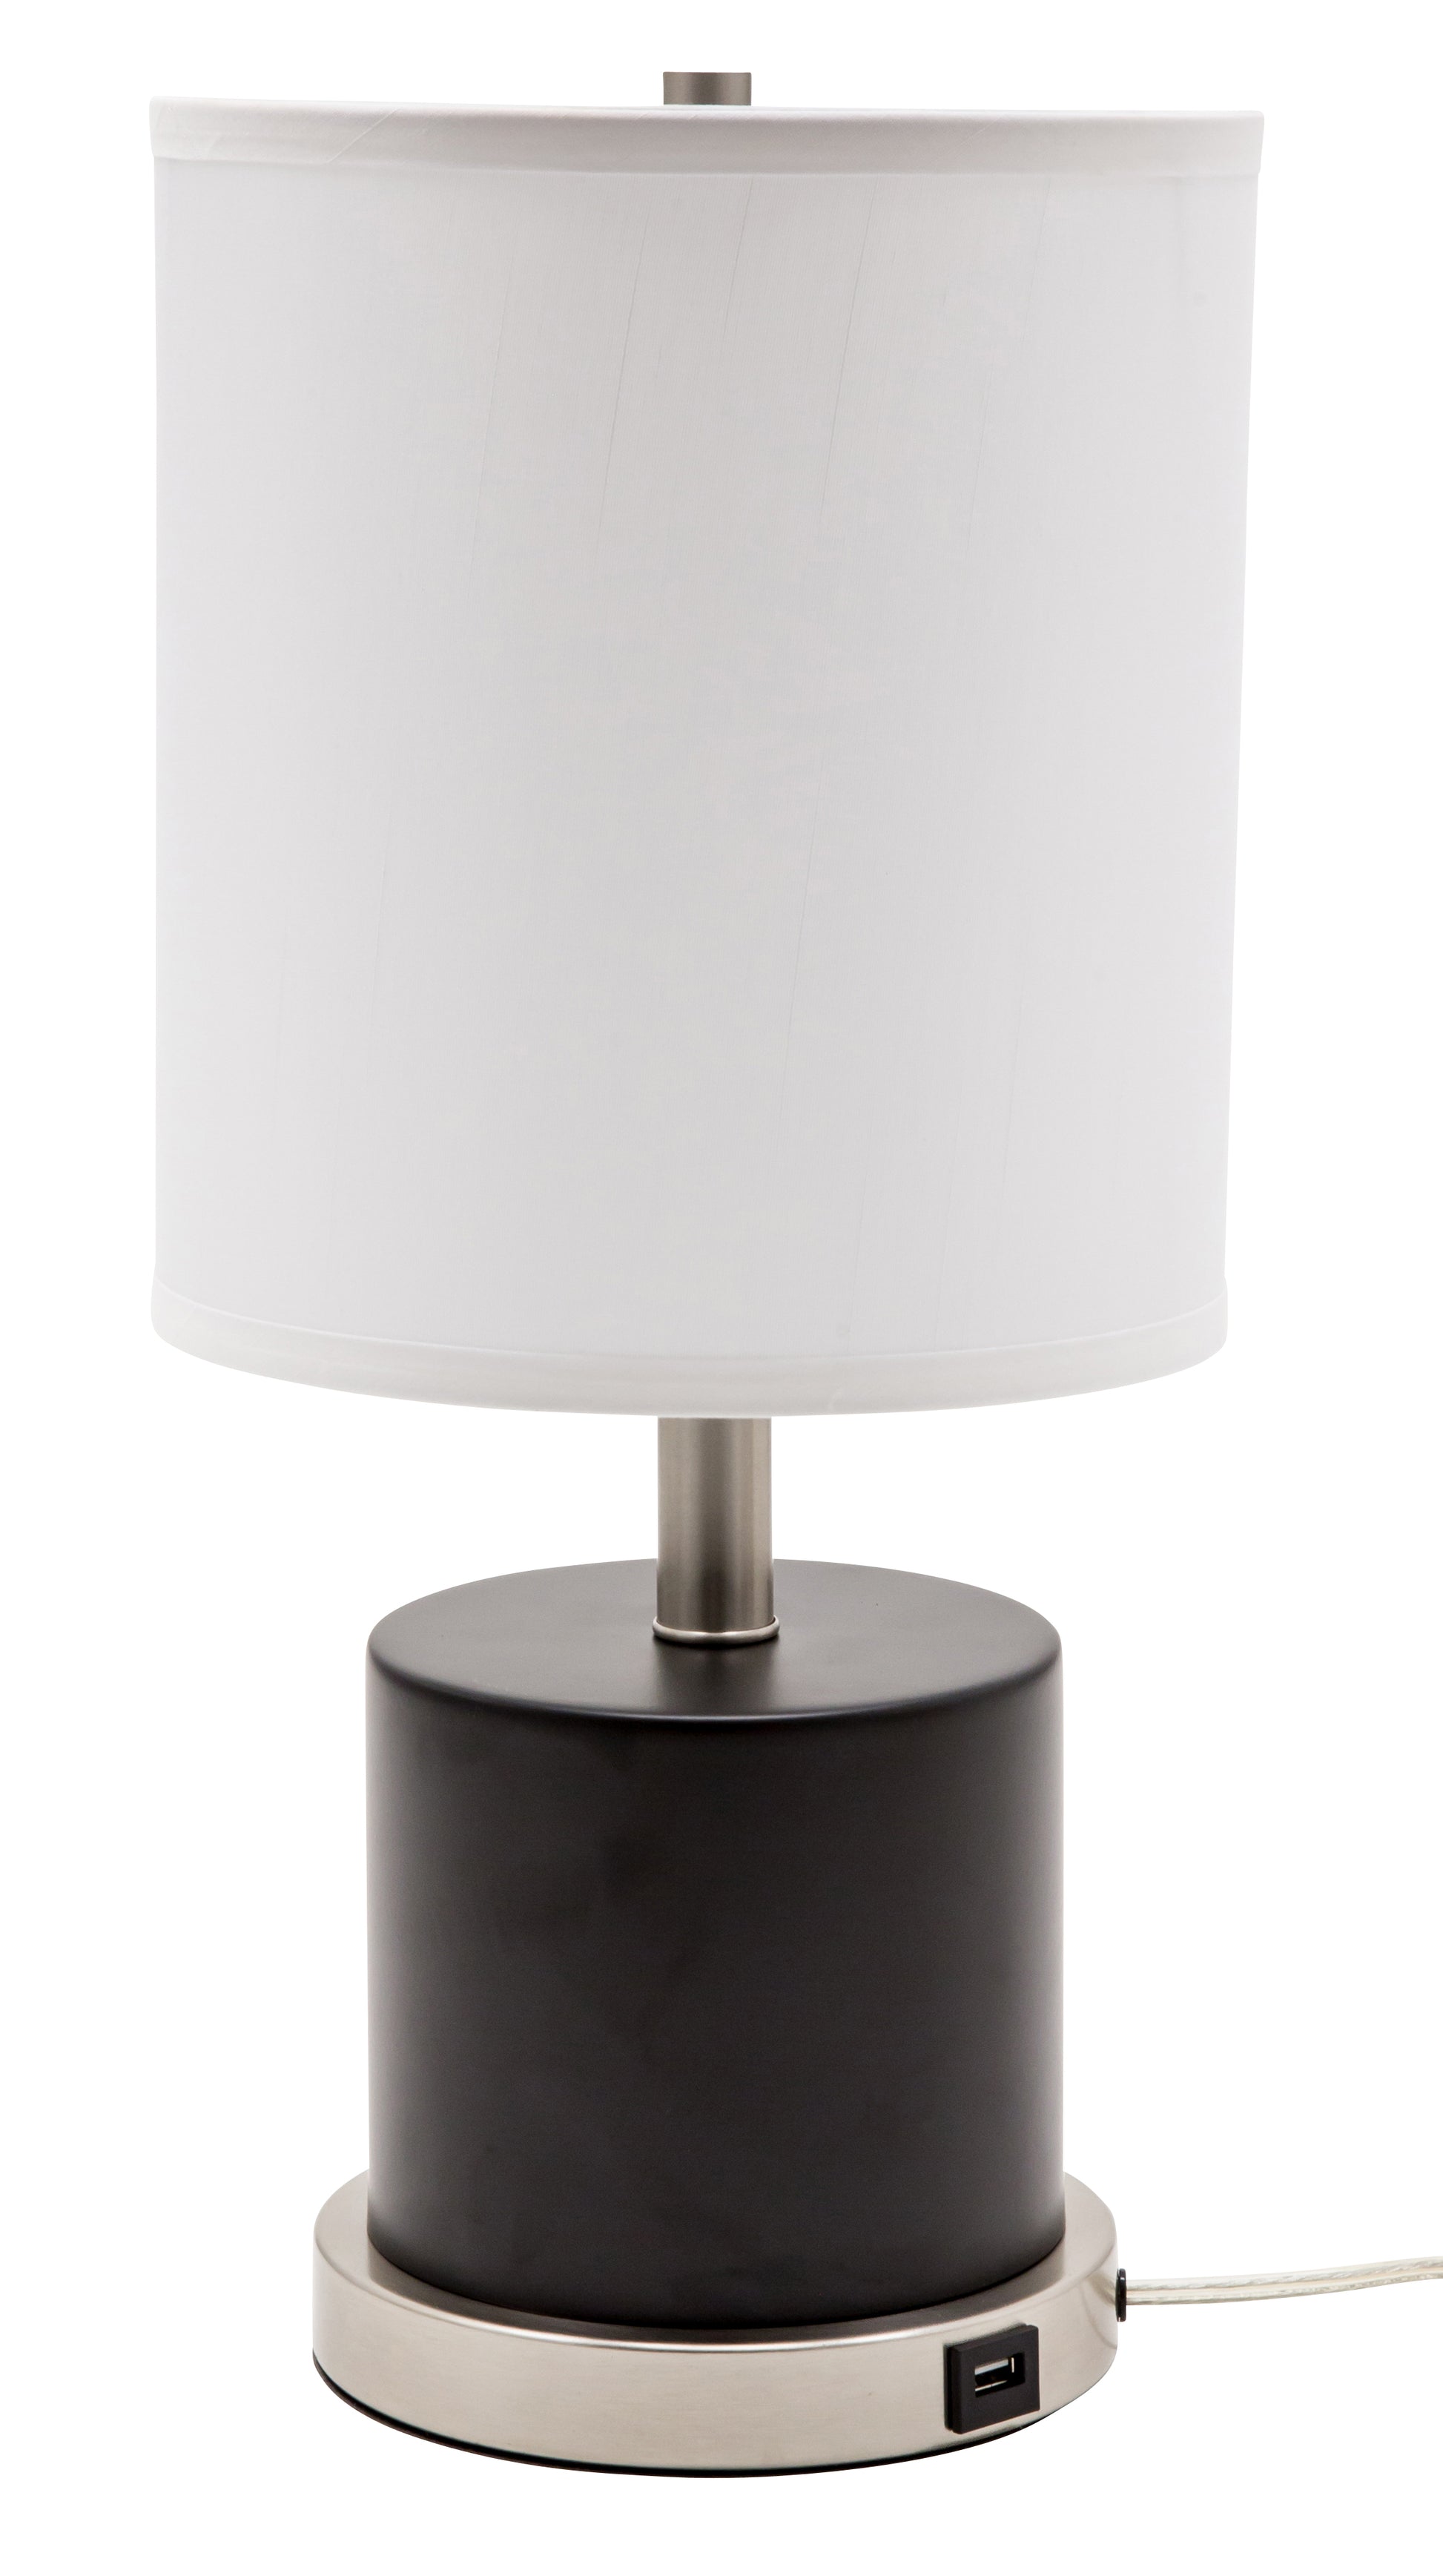 House of Troy Rupert Table Lamp Black Satin Nickel Accents USB Port RU752-BLK